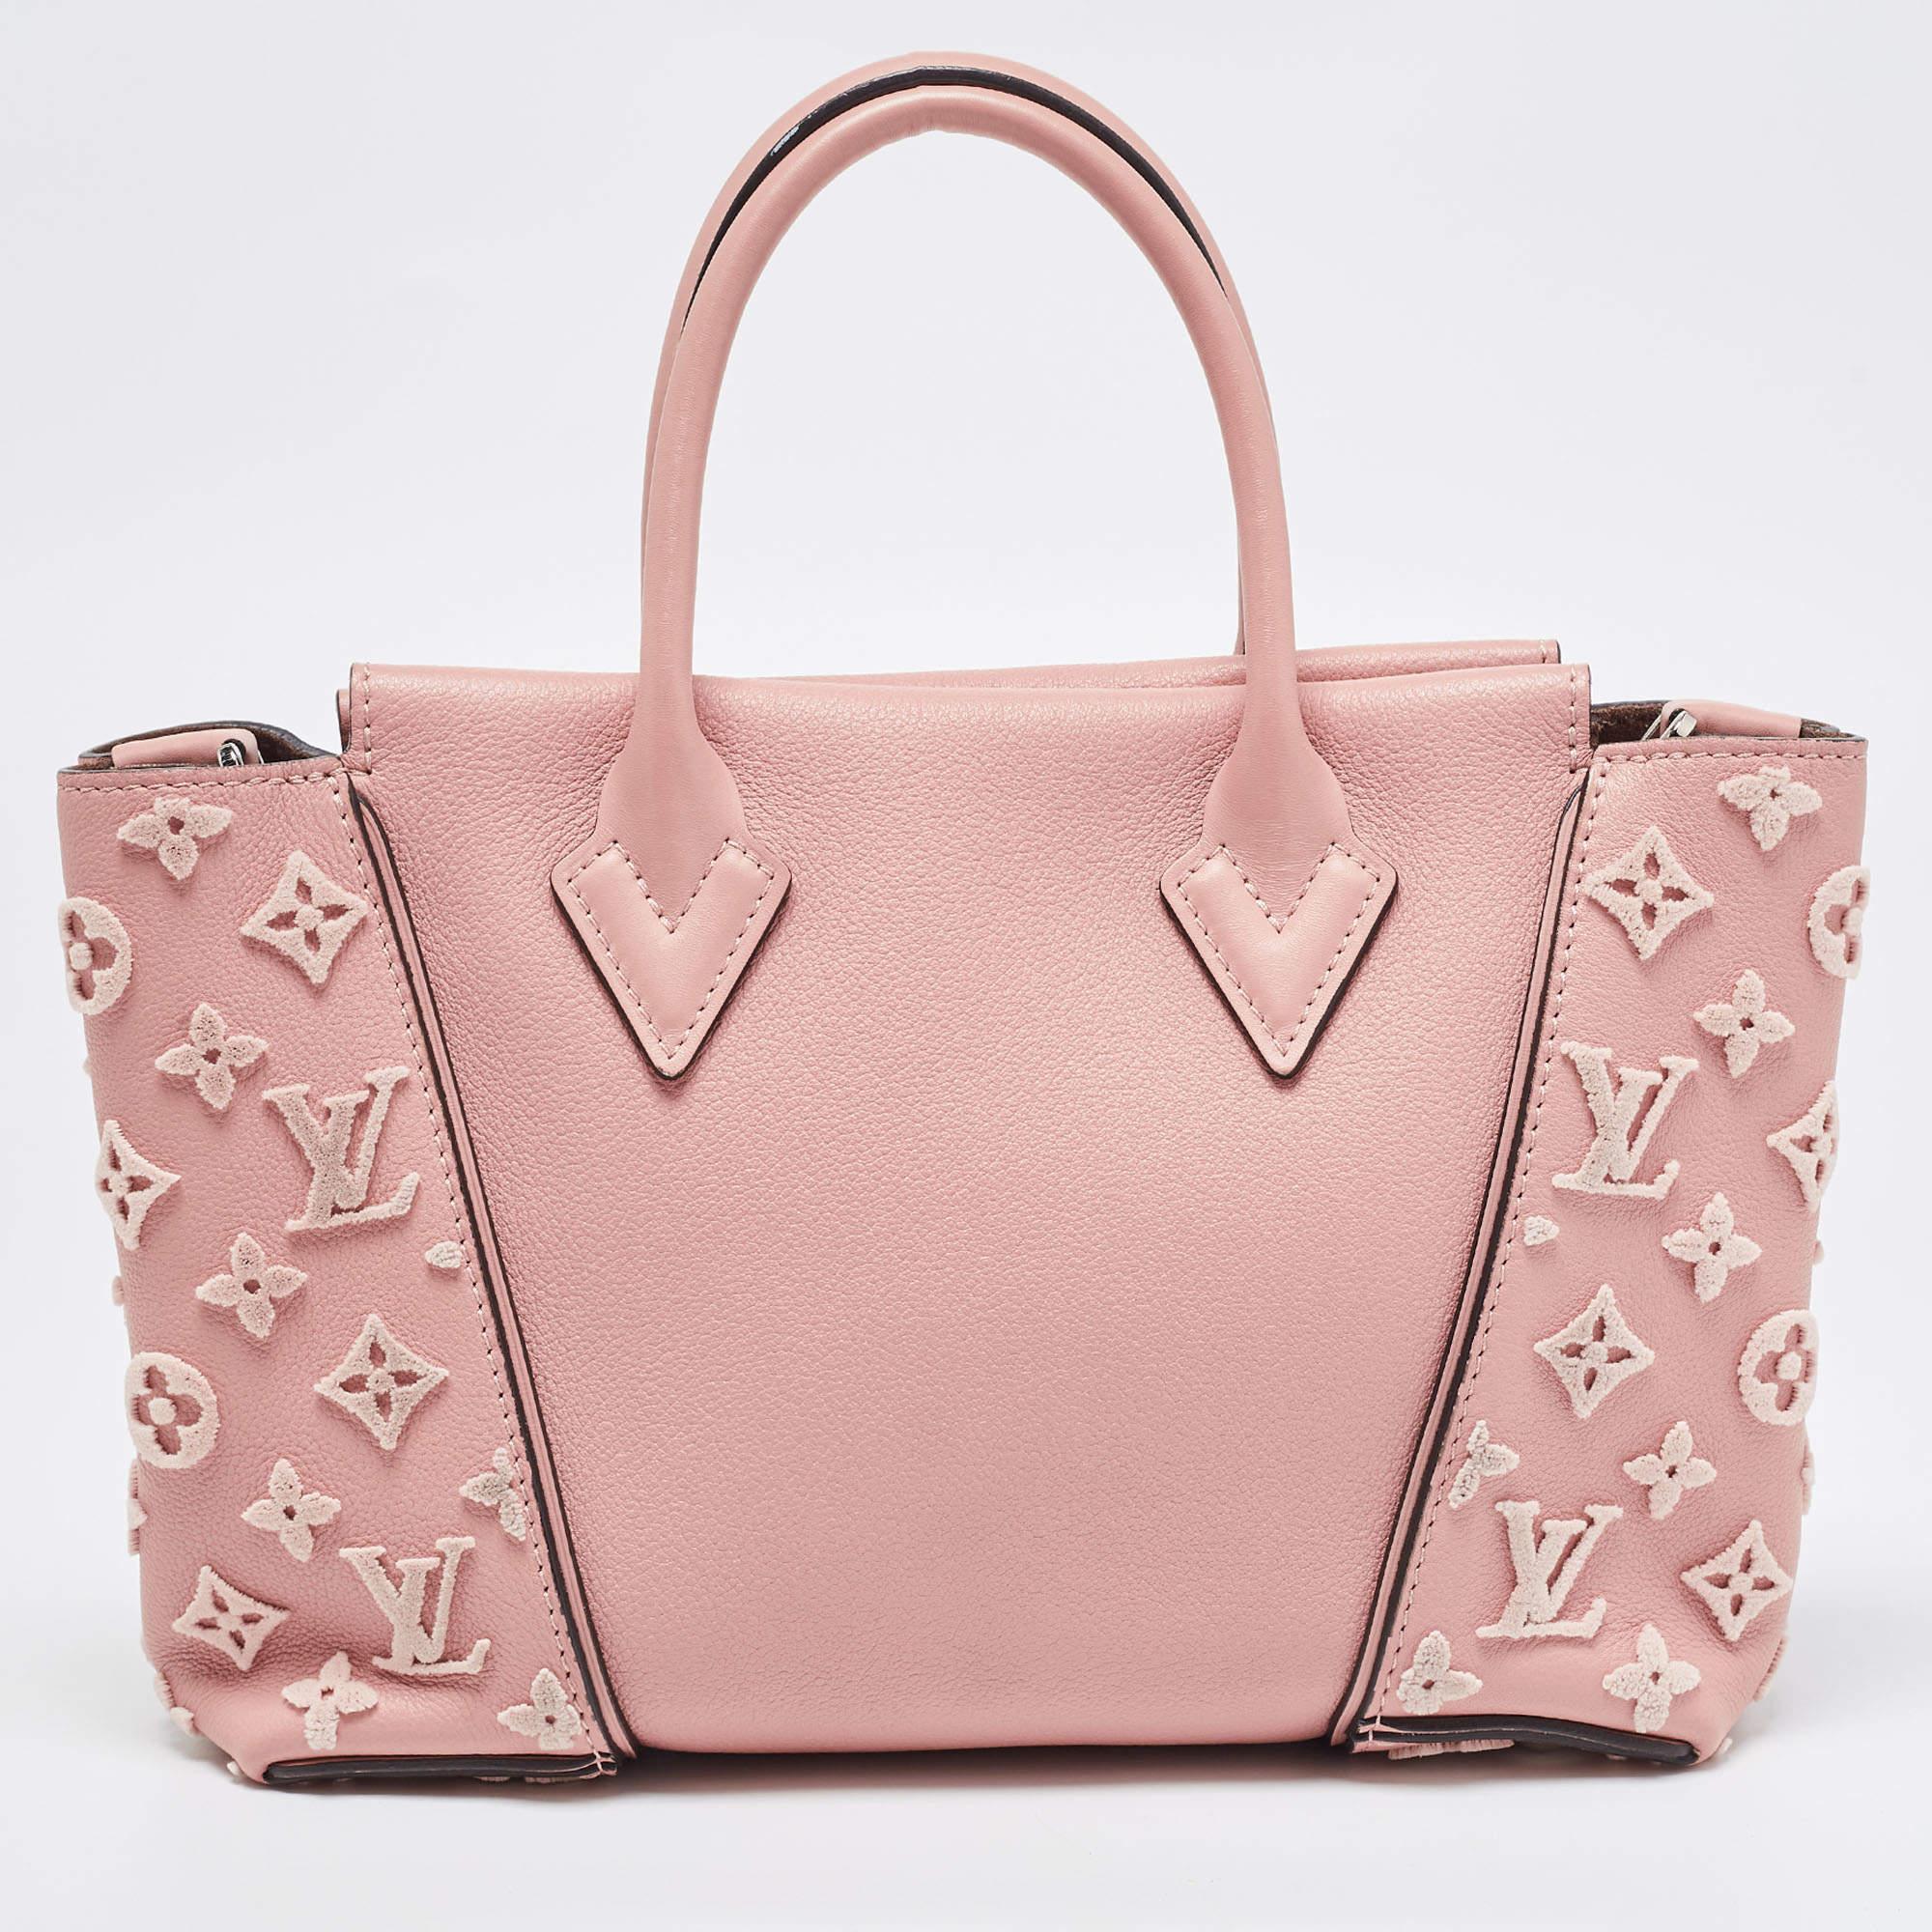 The Louis Vuitton W Bag is an exquisite fashion accessory. Its exterior features the iconic LV monogram pattern in luxurious velvet, while the sides and handles are crafted from soft Veau Cachemire leather. The 